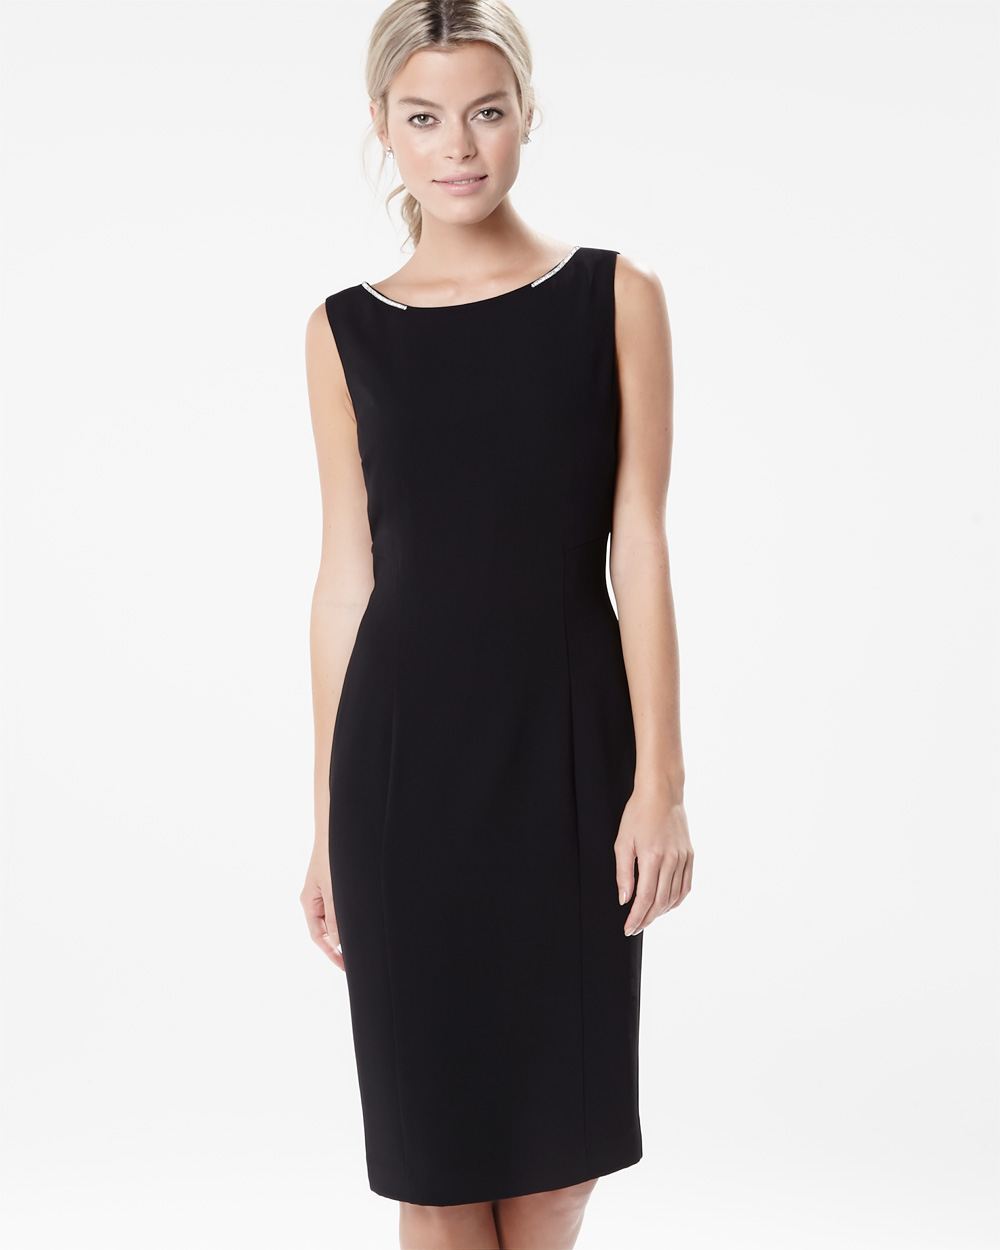 Fitted sleeveless dress with jeweled neck | RW&CO.